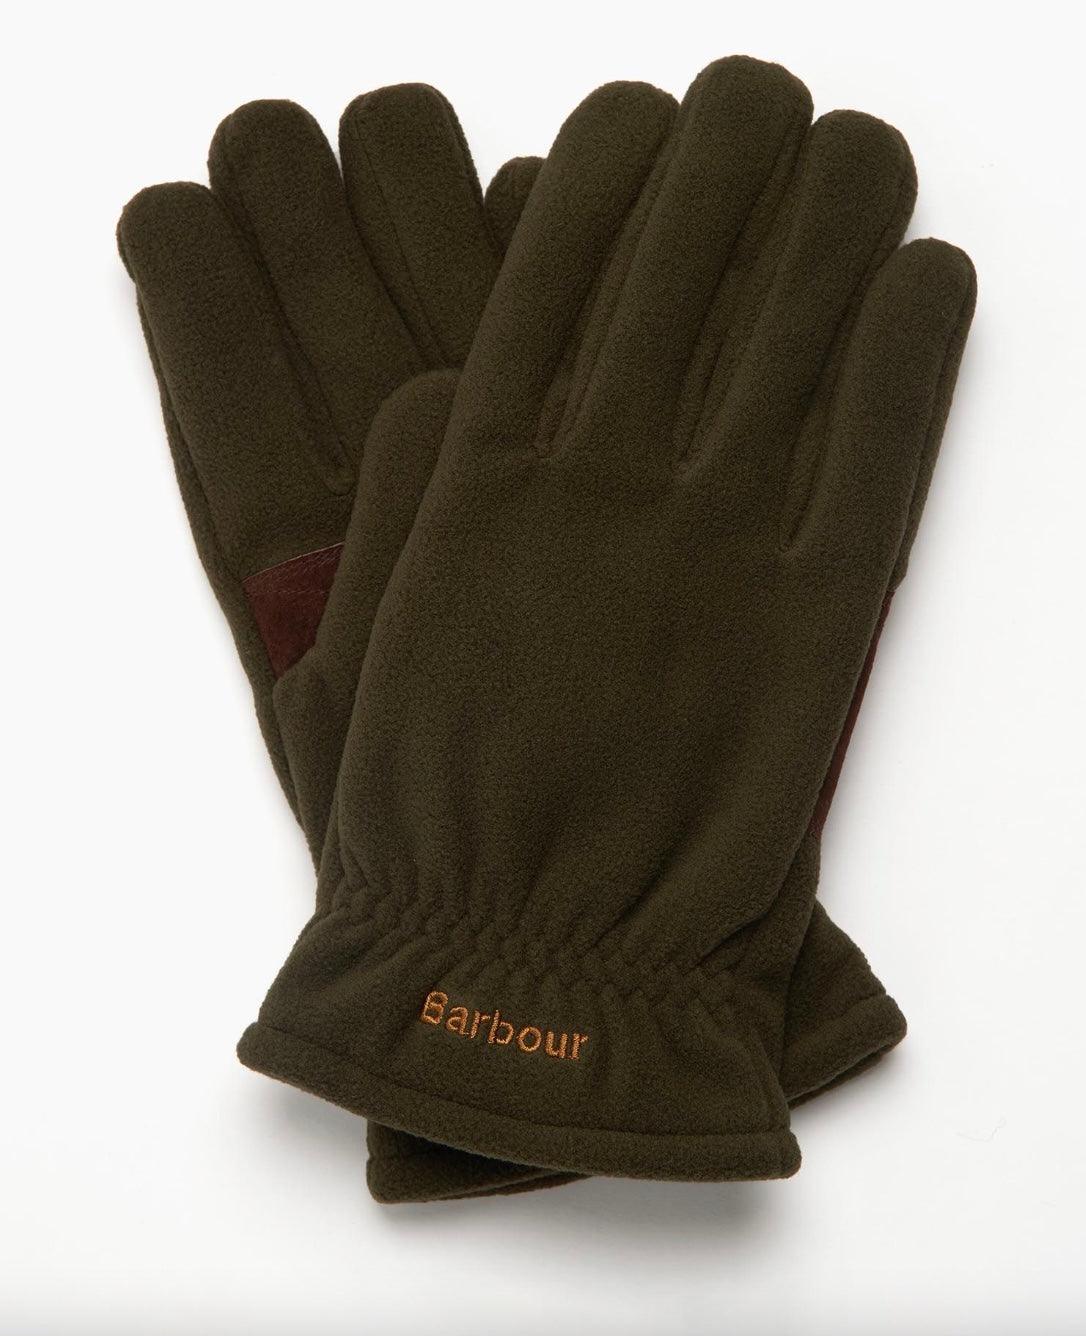 Men's Tagged "Barbour"– Gun Hill Clothing Company